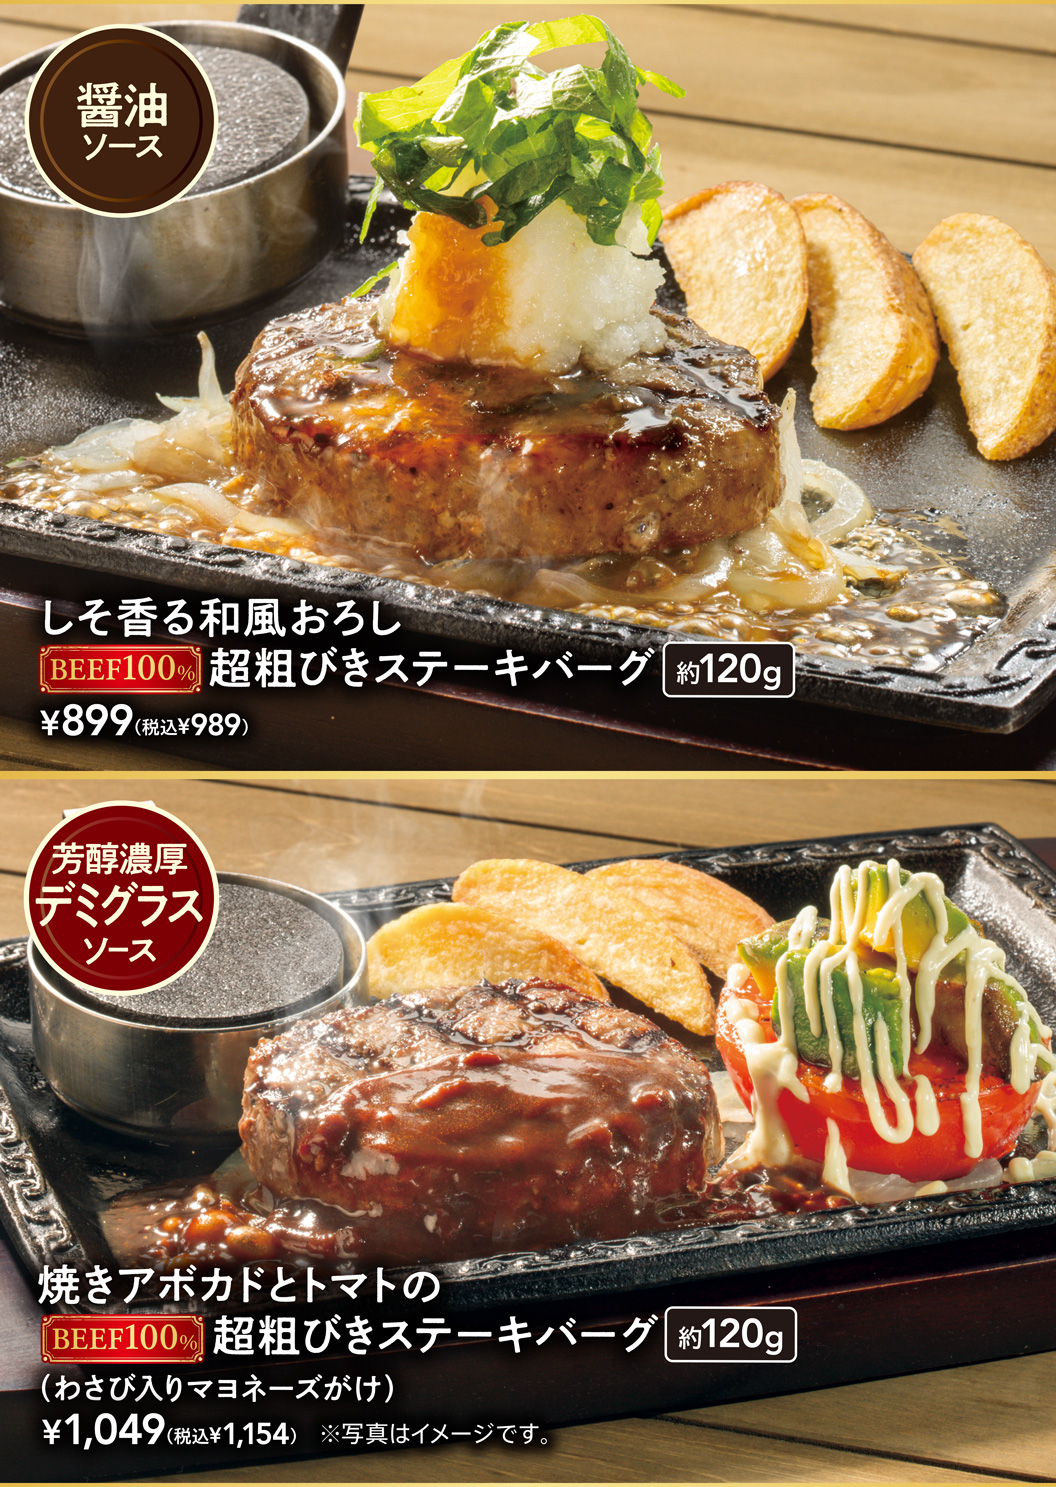 Coarsely Ground Beef Hamburg Steak with shiso aroma Grilled avocado and tomato Coarsely Ground Beef Hamburg Steak